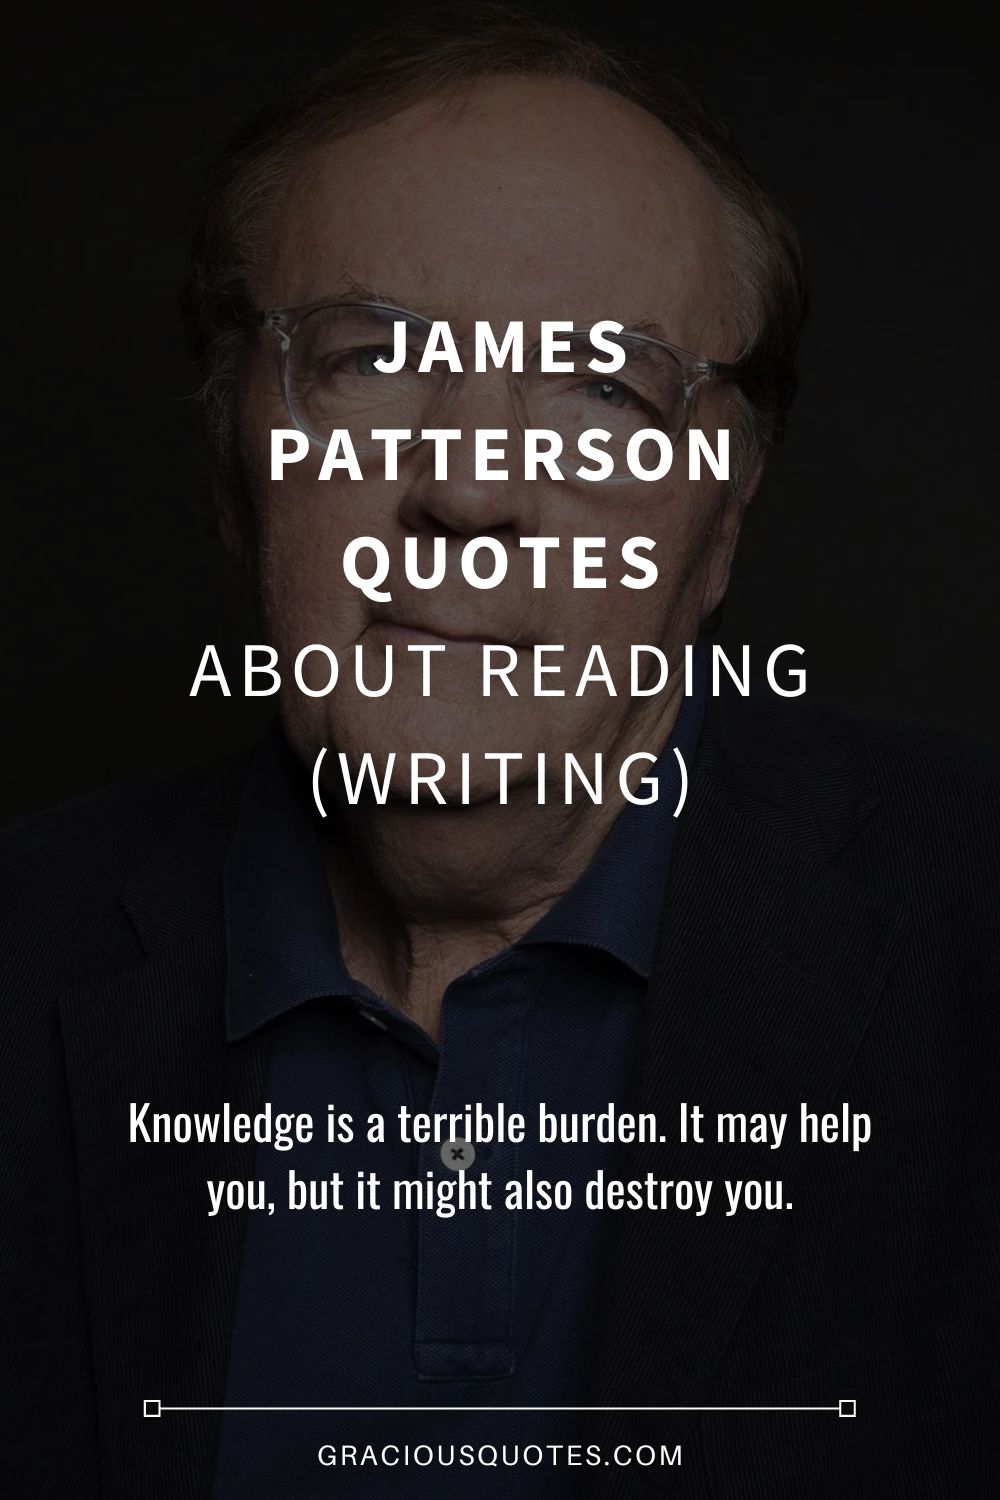 James Patterson Quotes About Reading (WRITING) - Gracious Quotes